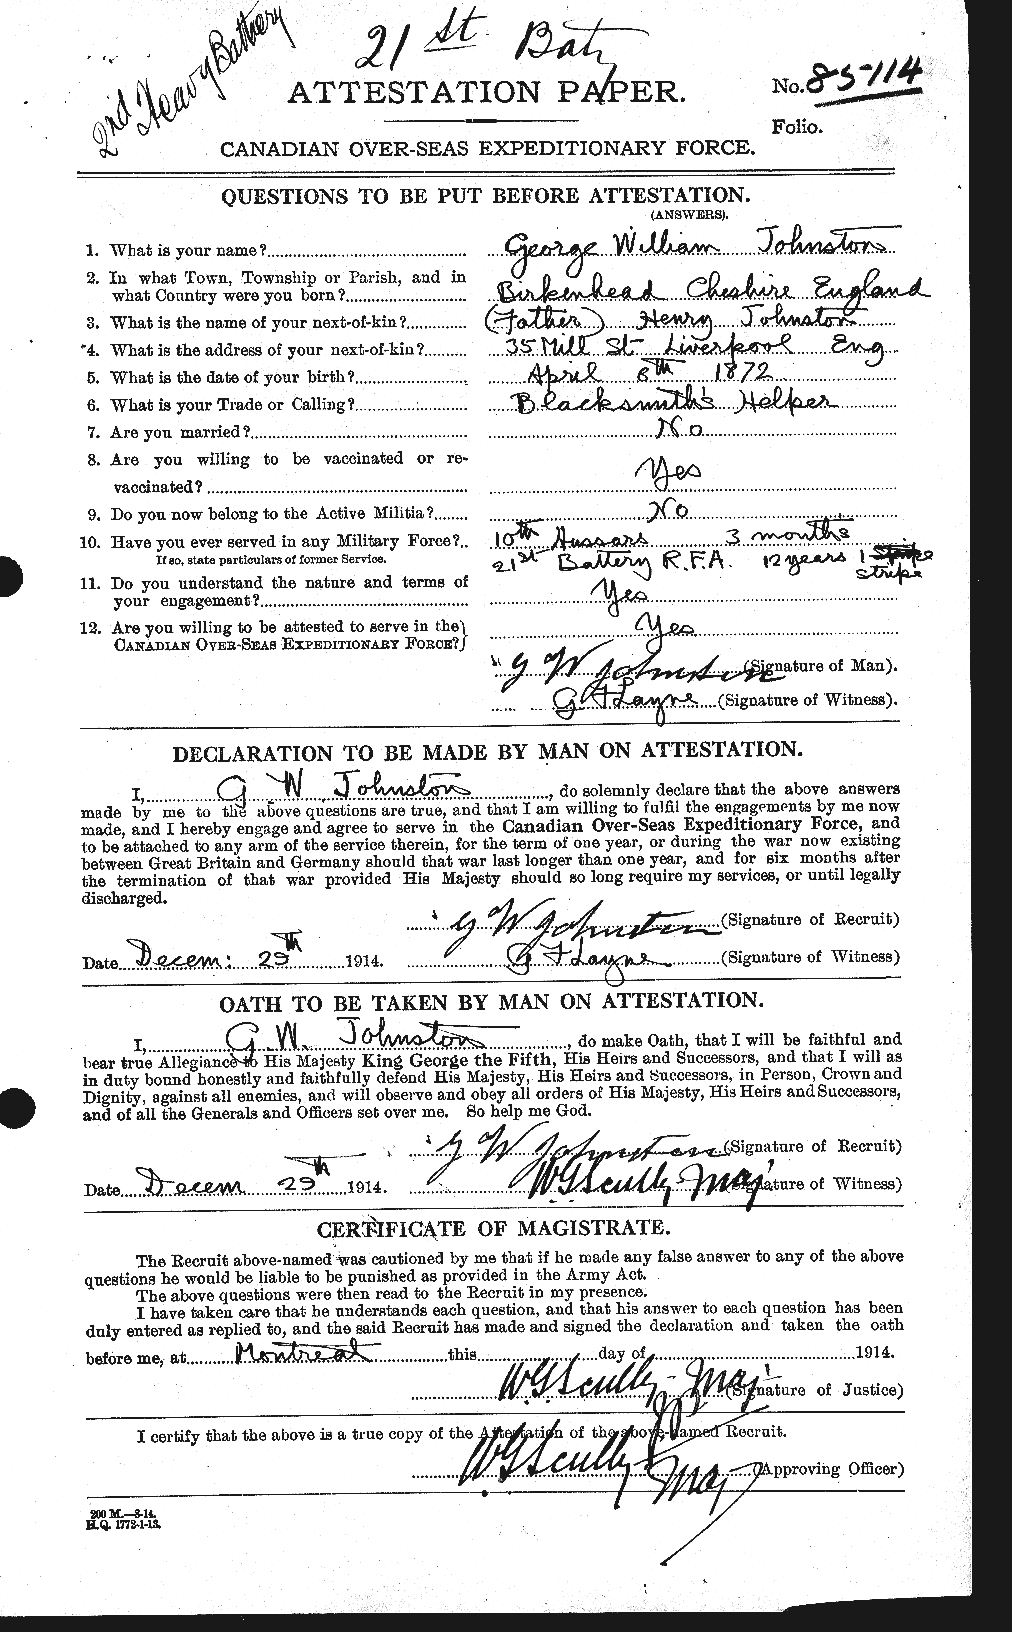 Personnel Records of the First World War - CEF 419455a